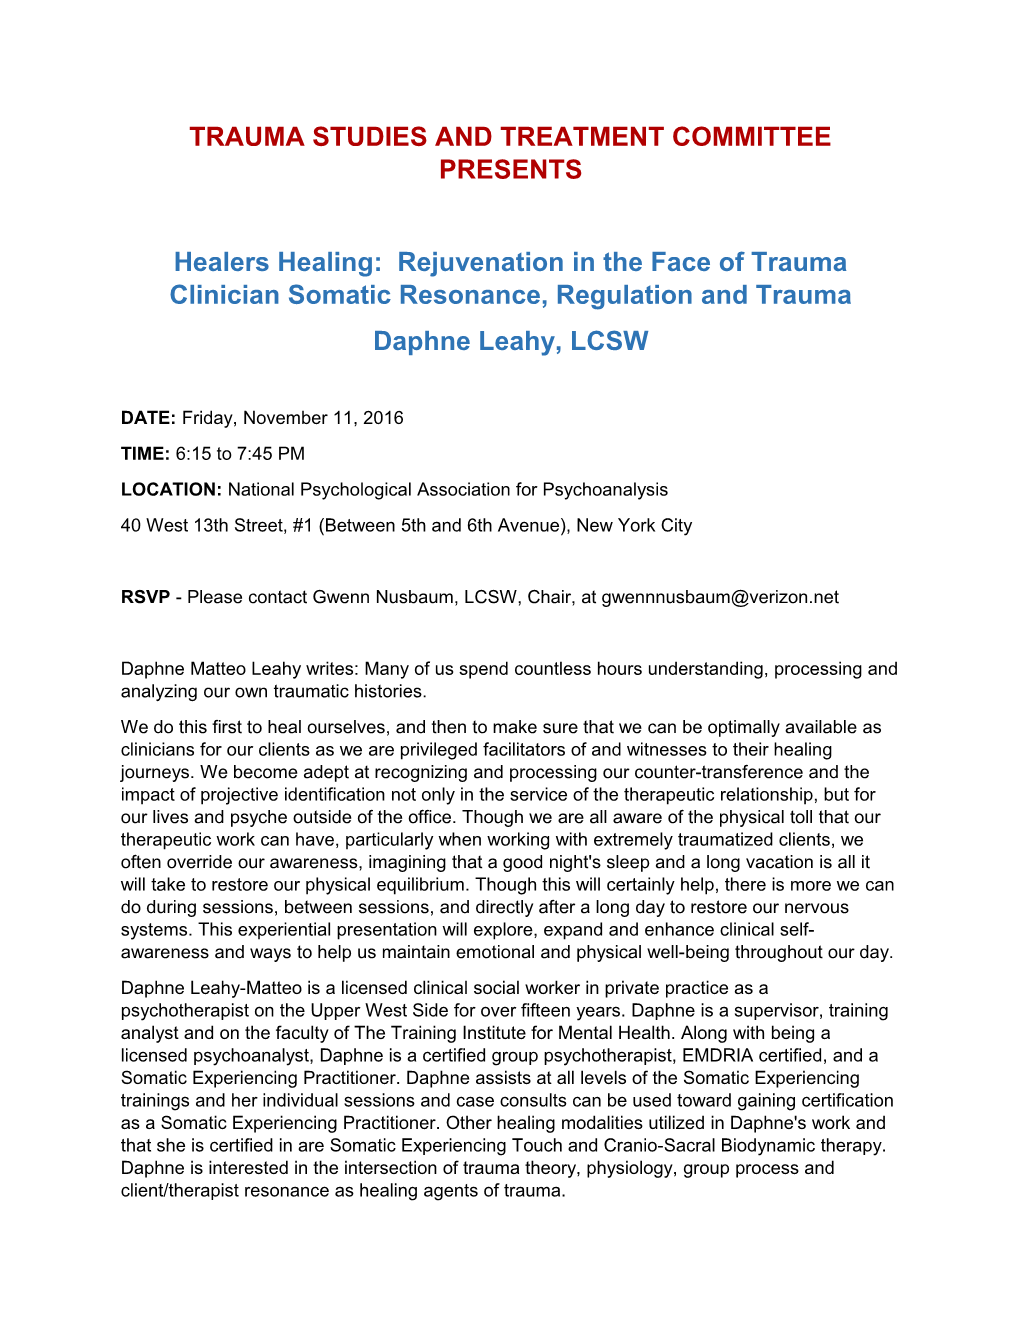 Trauma Studies and Treatment Committee Presents